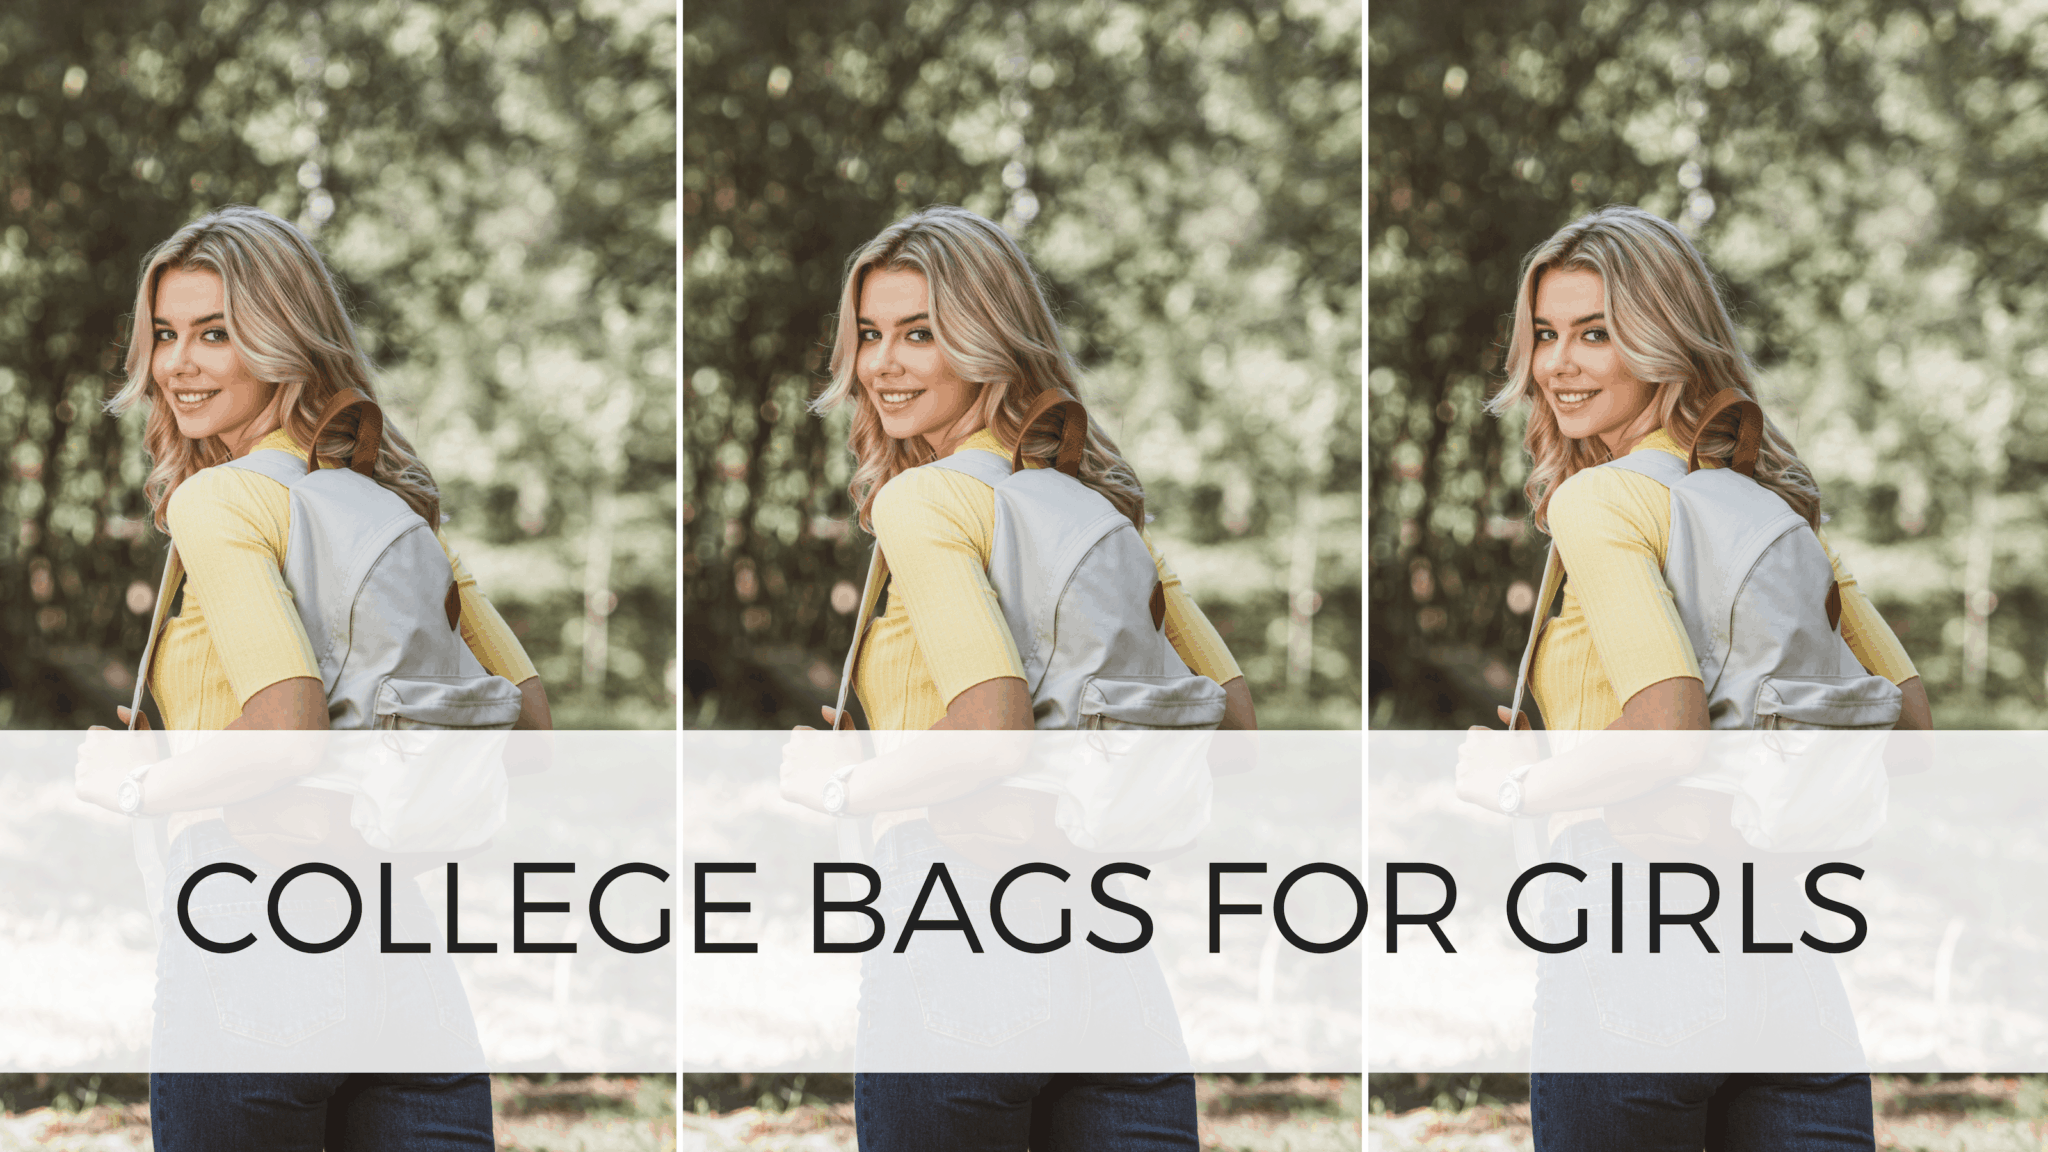 Would You Bring a Luxury Bag to College Classes?